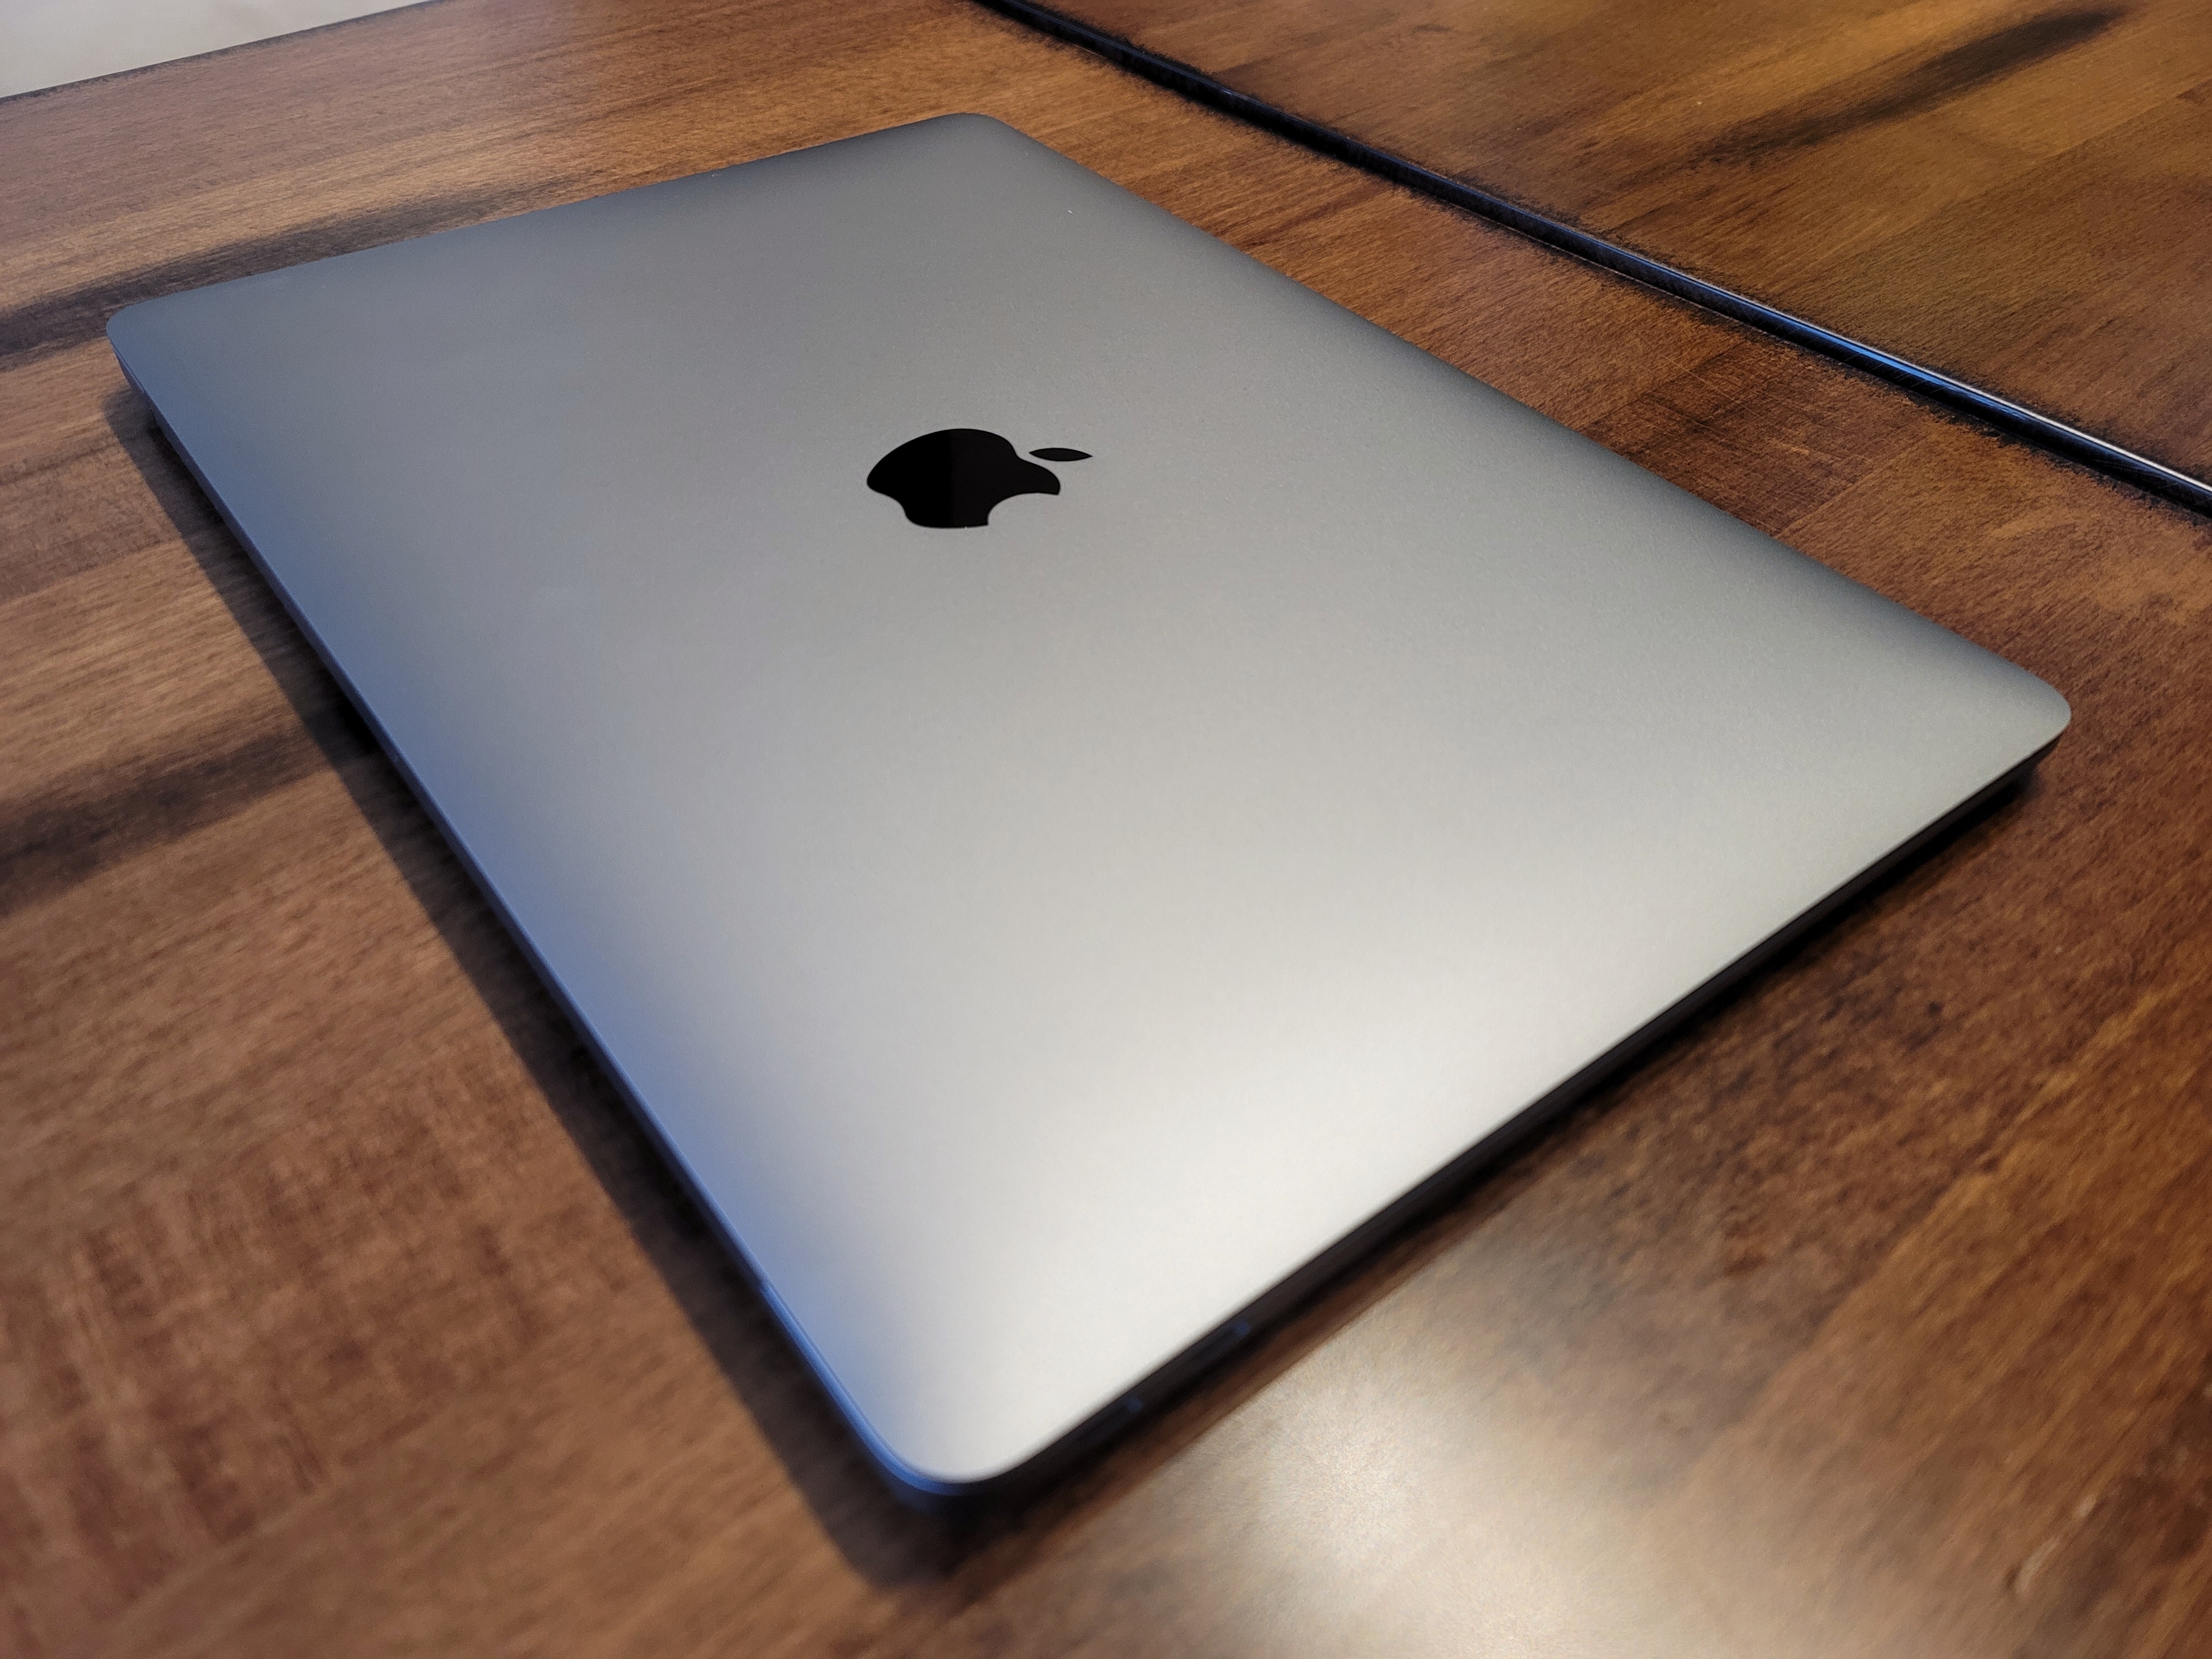 MacBook Air M1 review: The right Apple Silicon Mac for most 